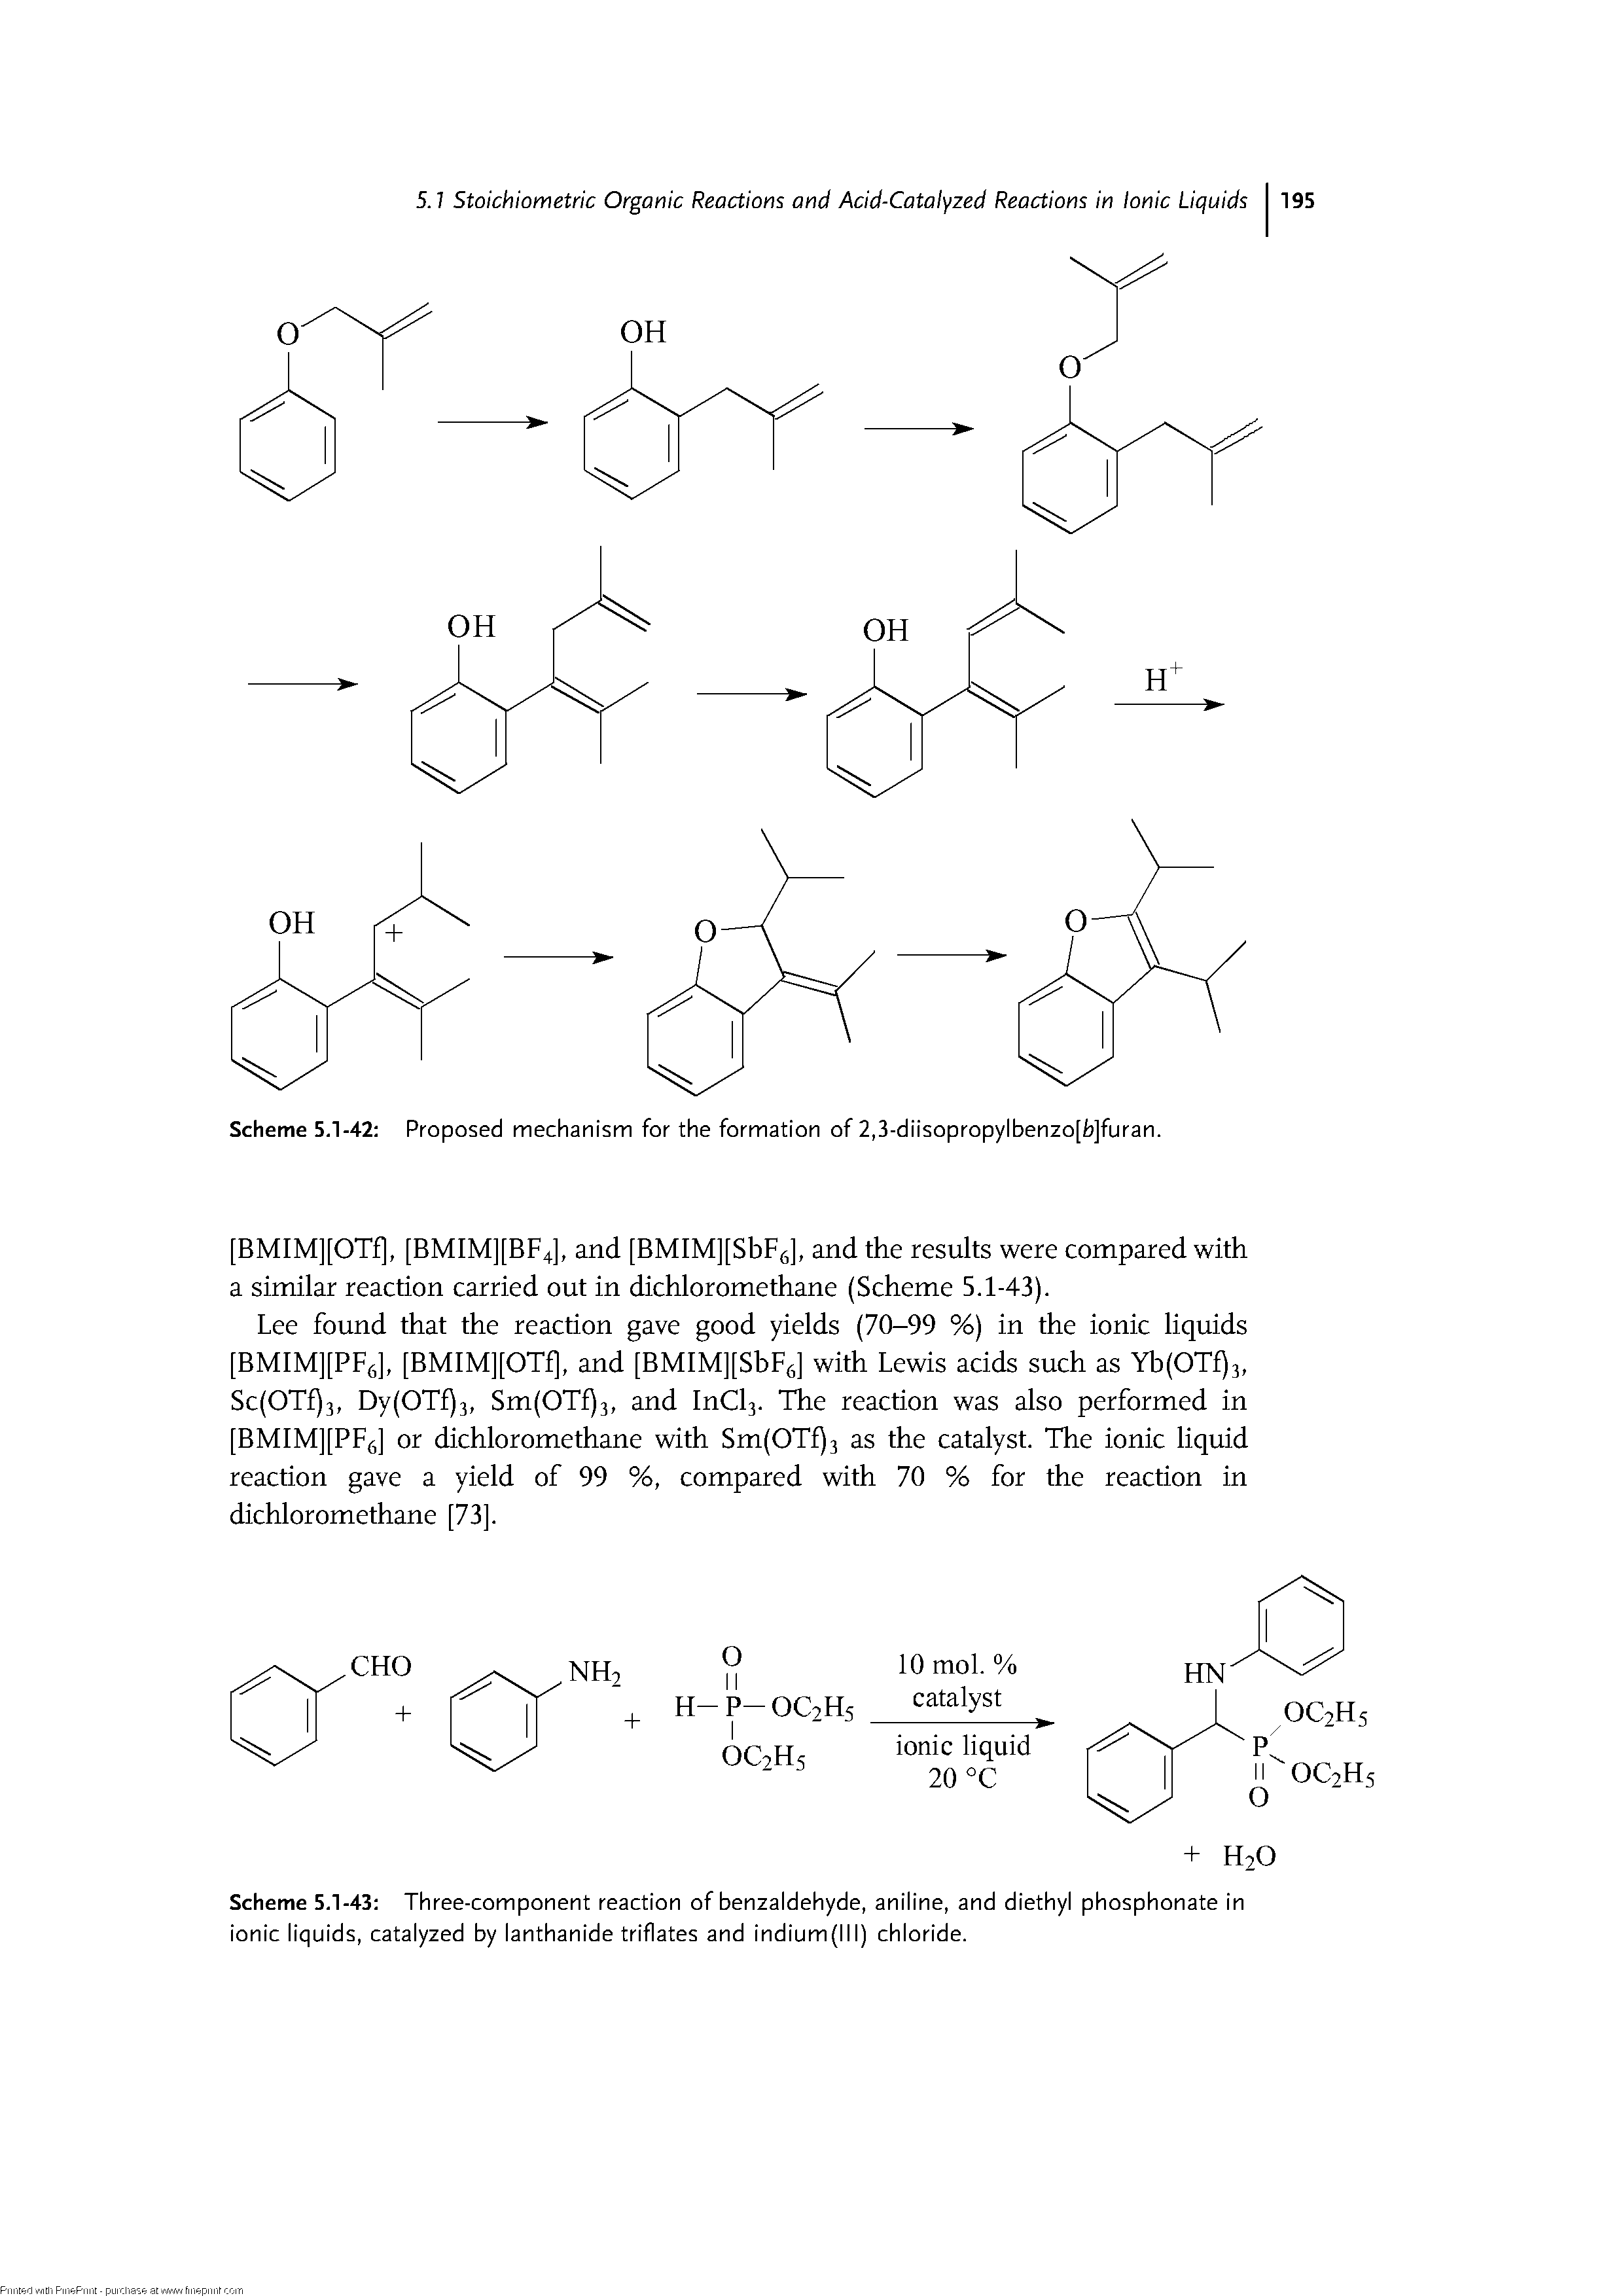 Scheme 5.1-42 Proposed mechanism for the formation of 2,3-diisopropyibenzo[b]furan.